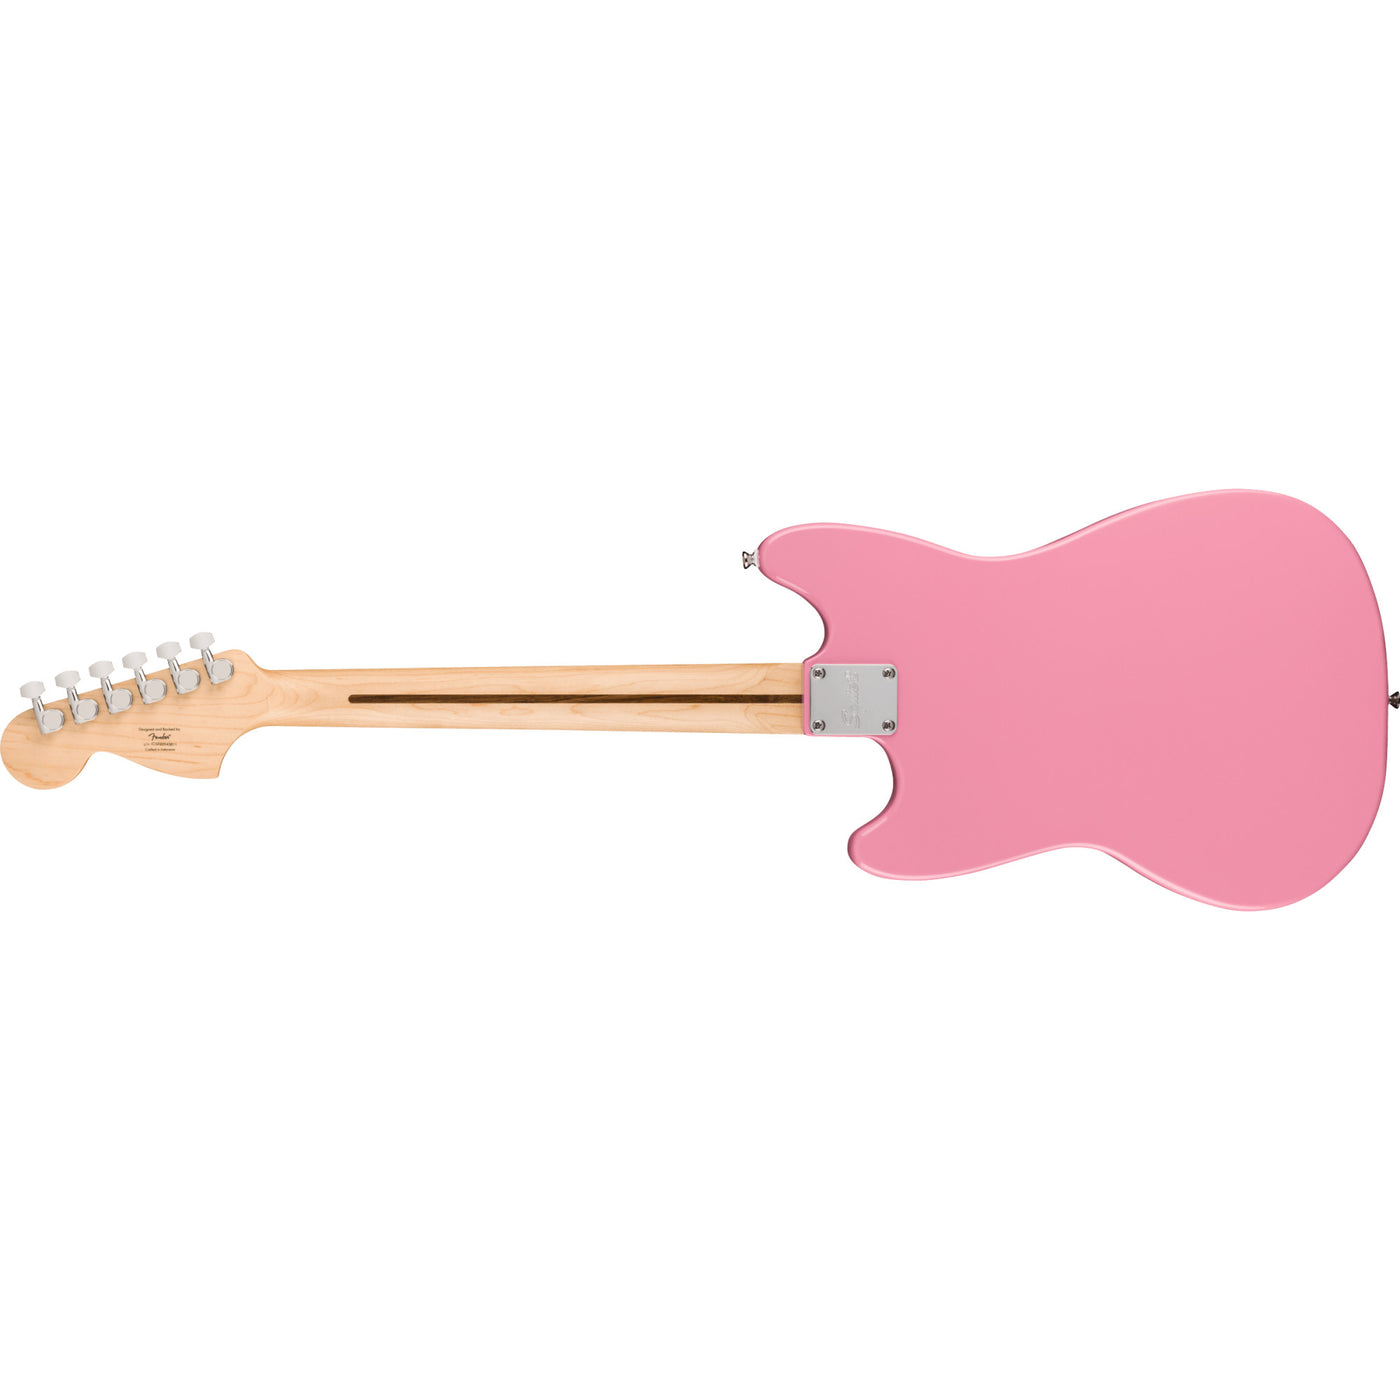 Squier Sonic Mustang HH Electric Guitar, Flash Pink (0373702555)